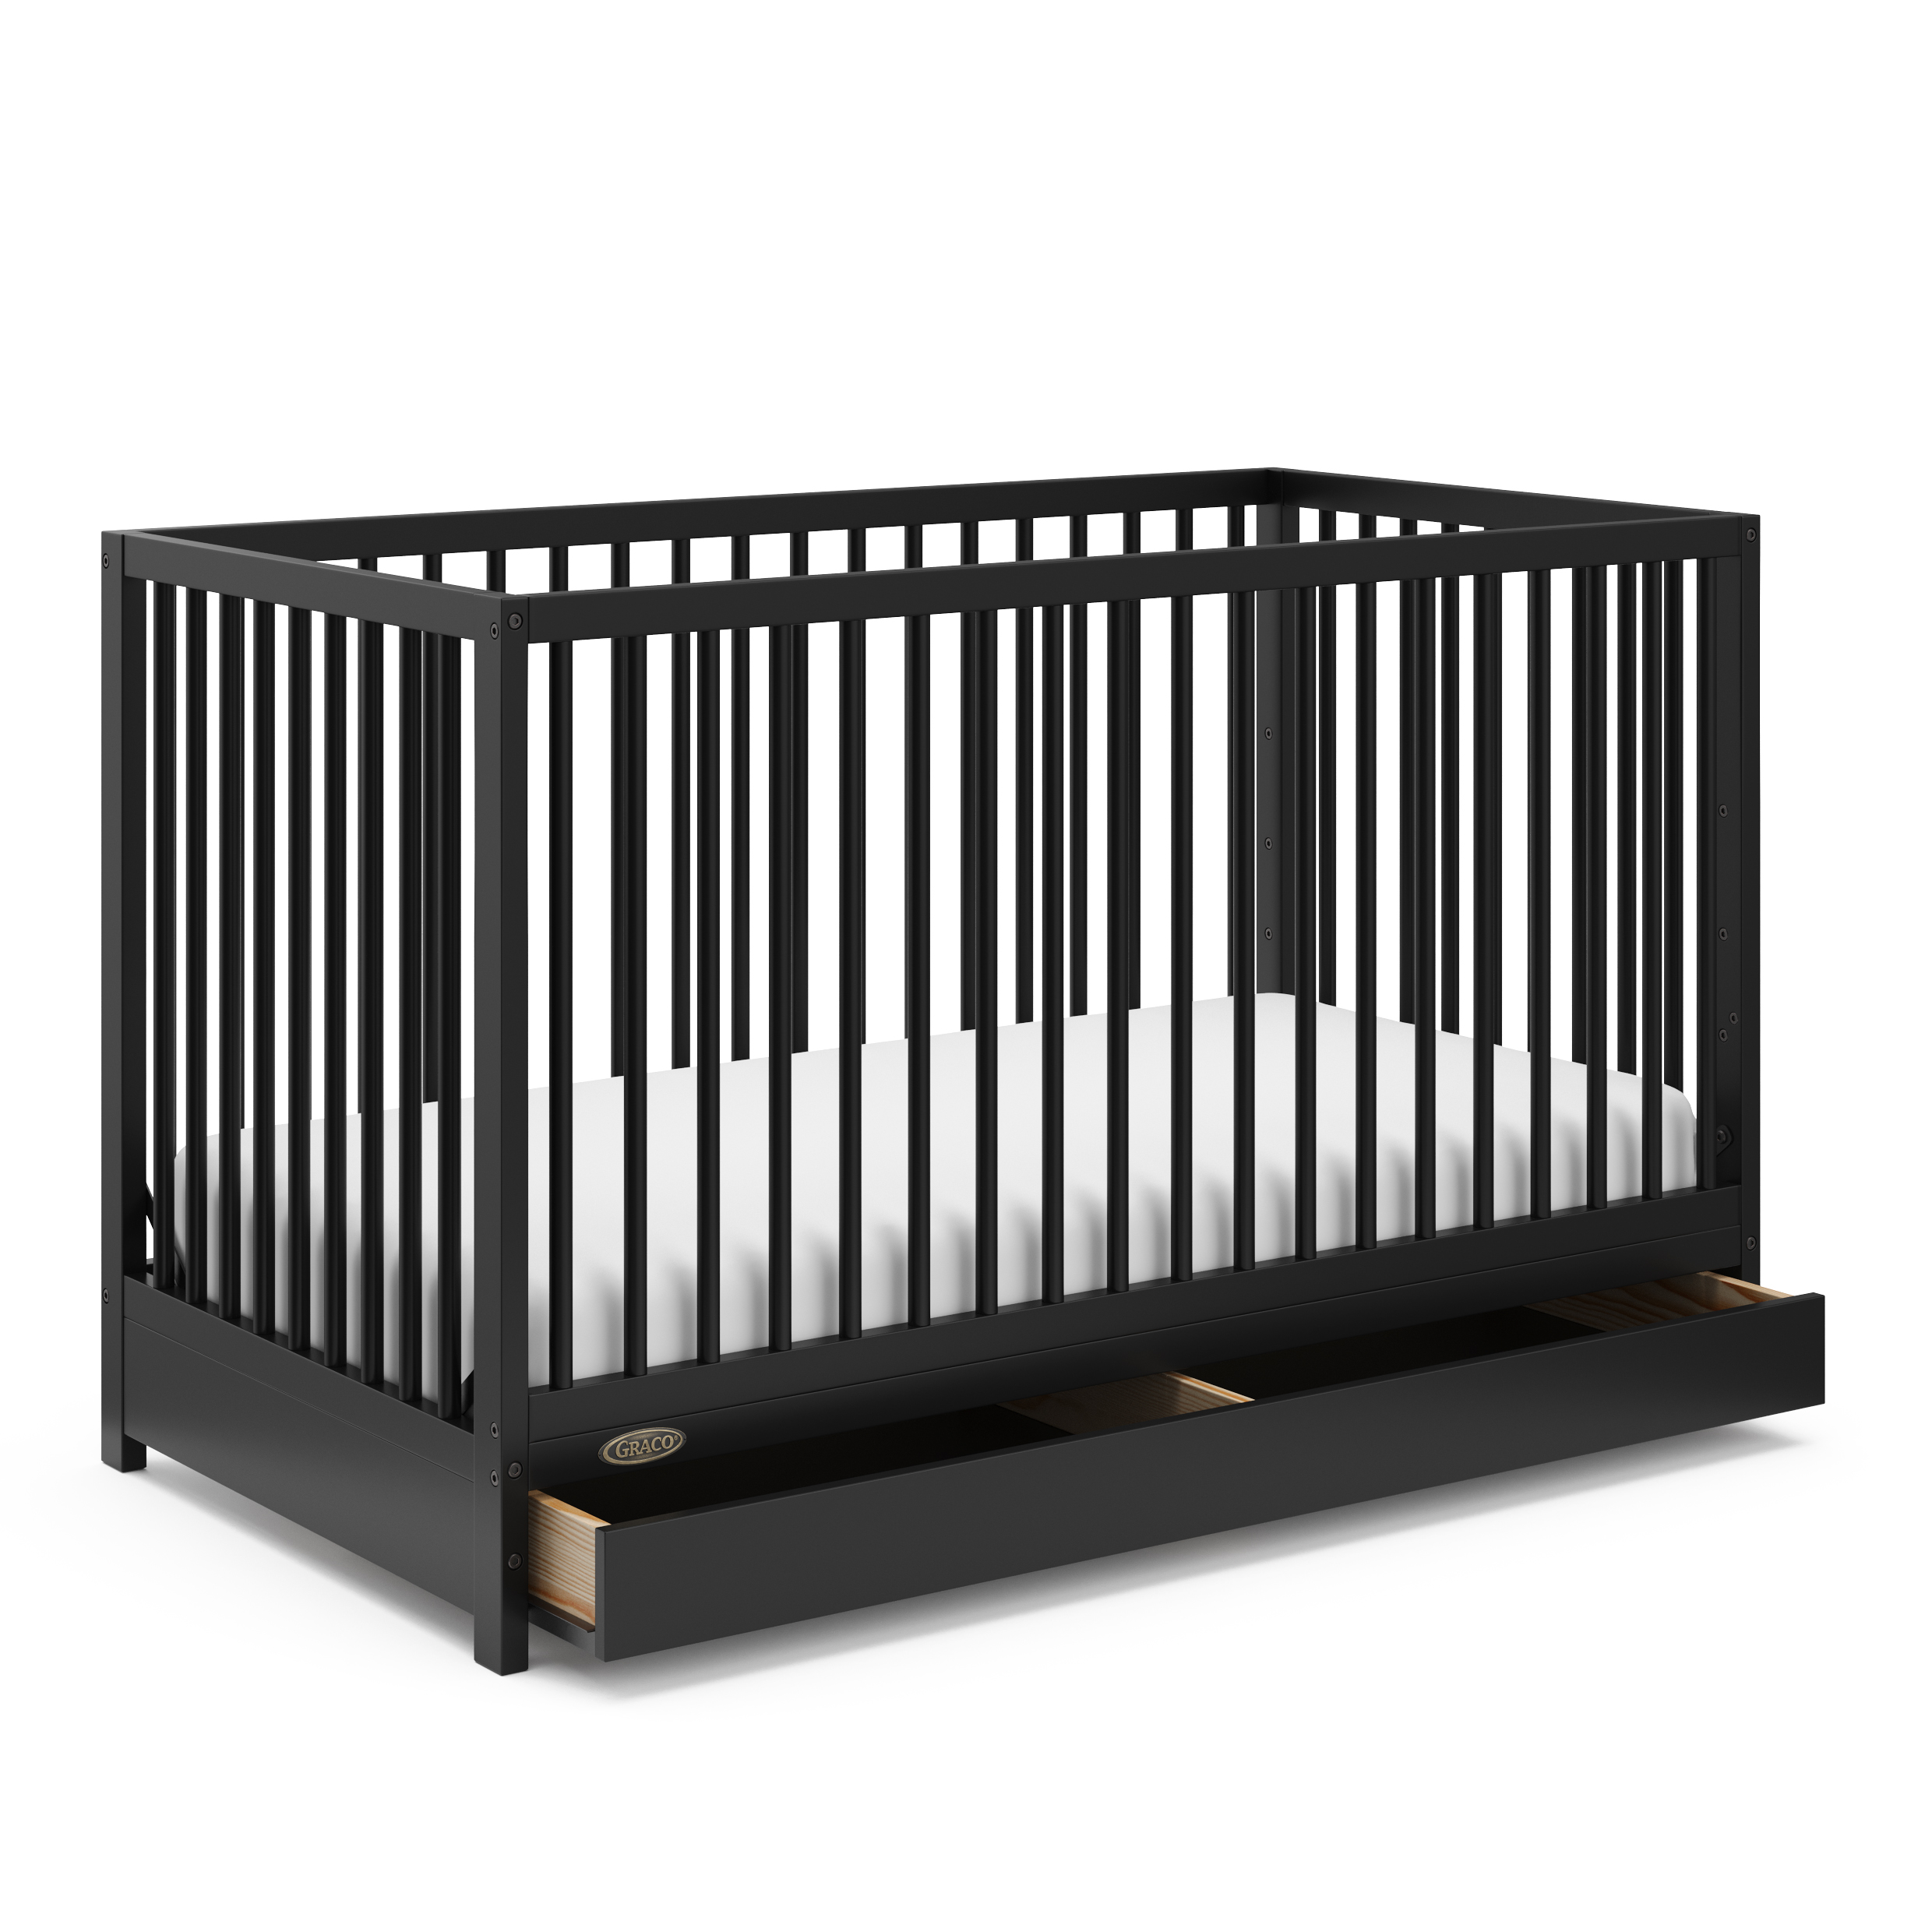 Graco Teddi 5-in-1 Convertible Baby Crib with Drawer, Black - image 1 of 16